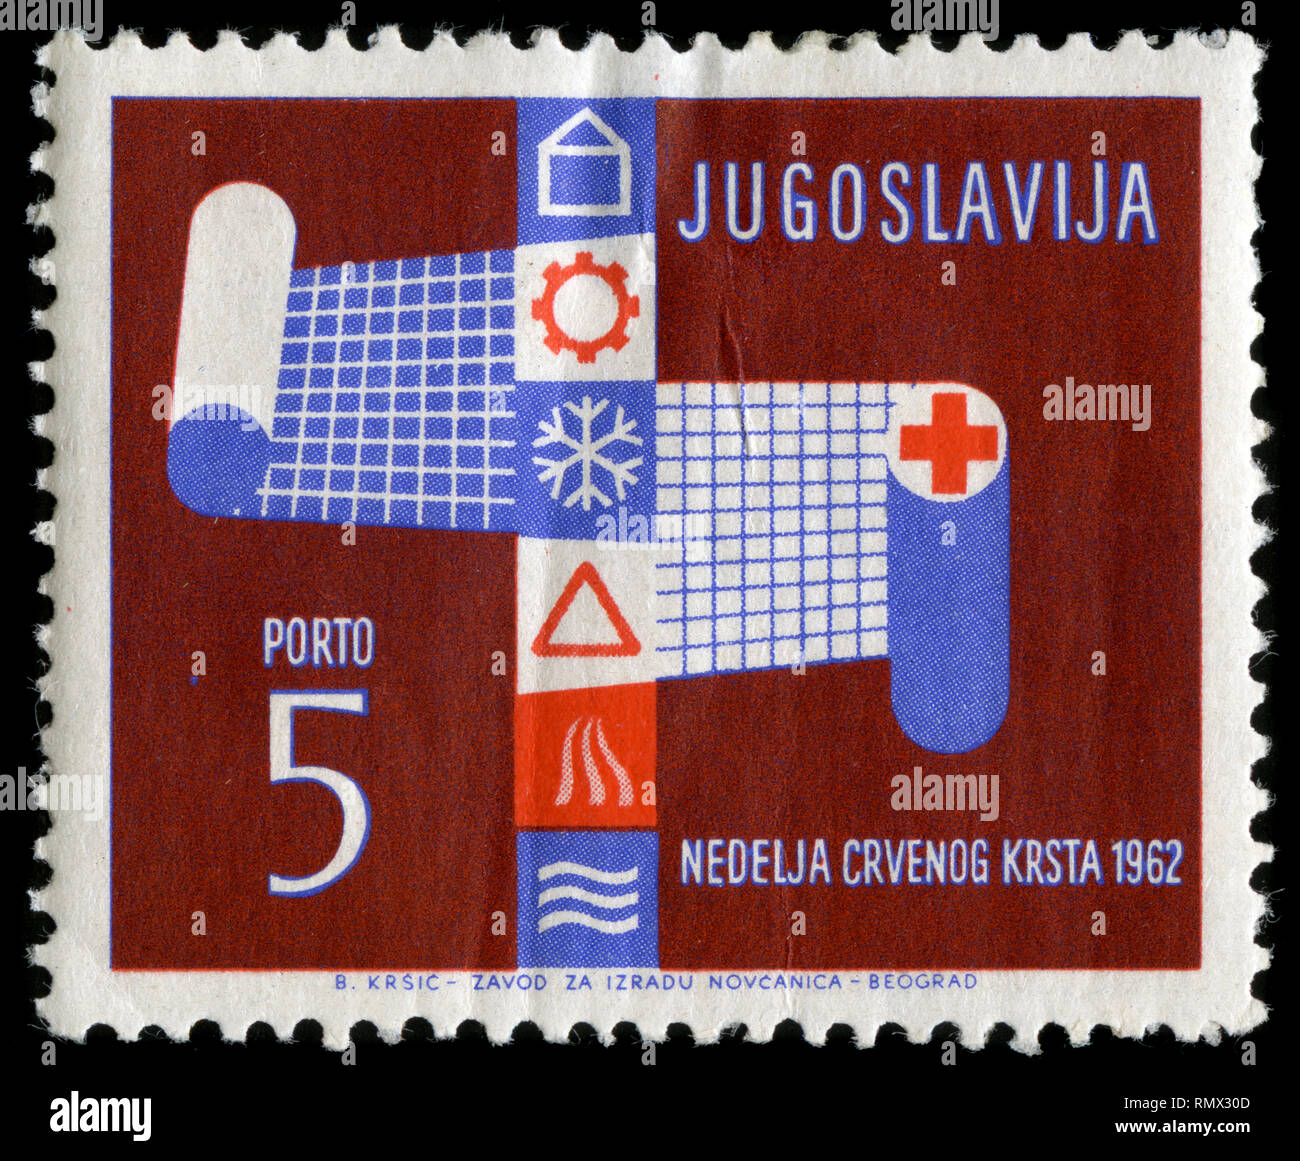 Postage stamp from the former state of Yugoslavia in the Red Cross series issued in 1962 Stock Photo